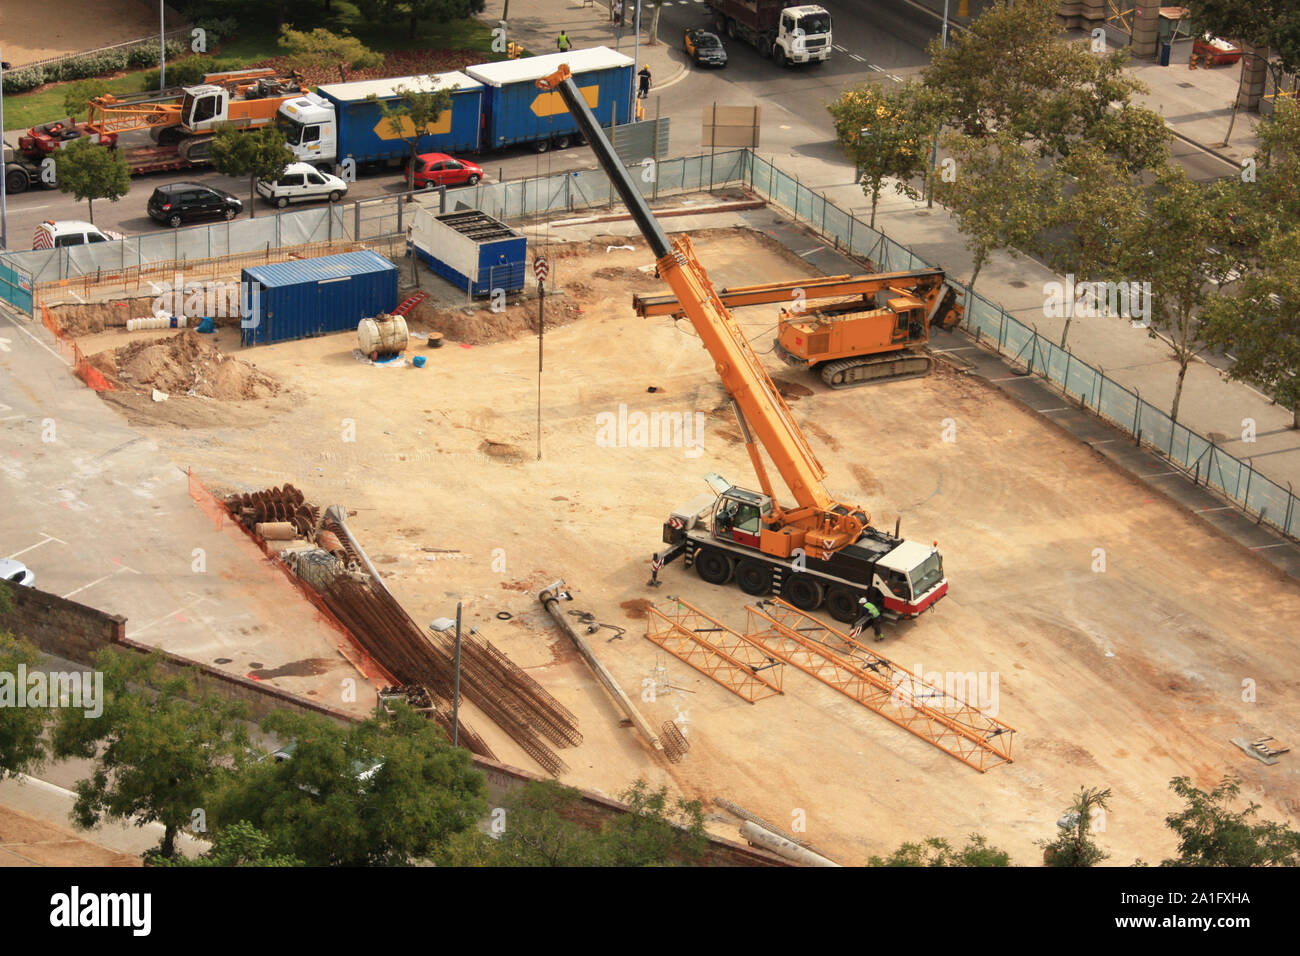 Machines working on a building site, on a street in Barcelona, Spain. Stock Photo